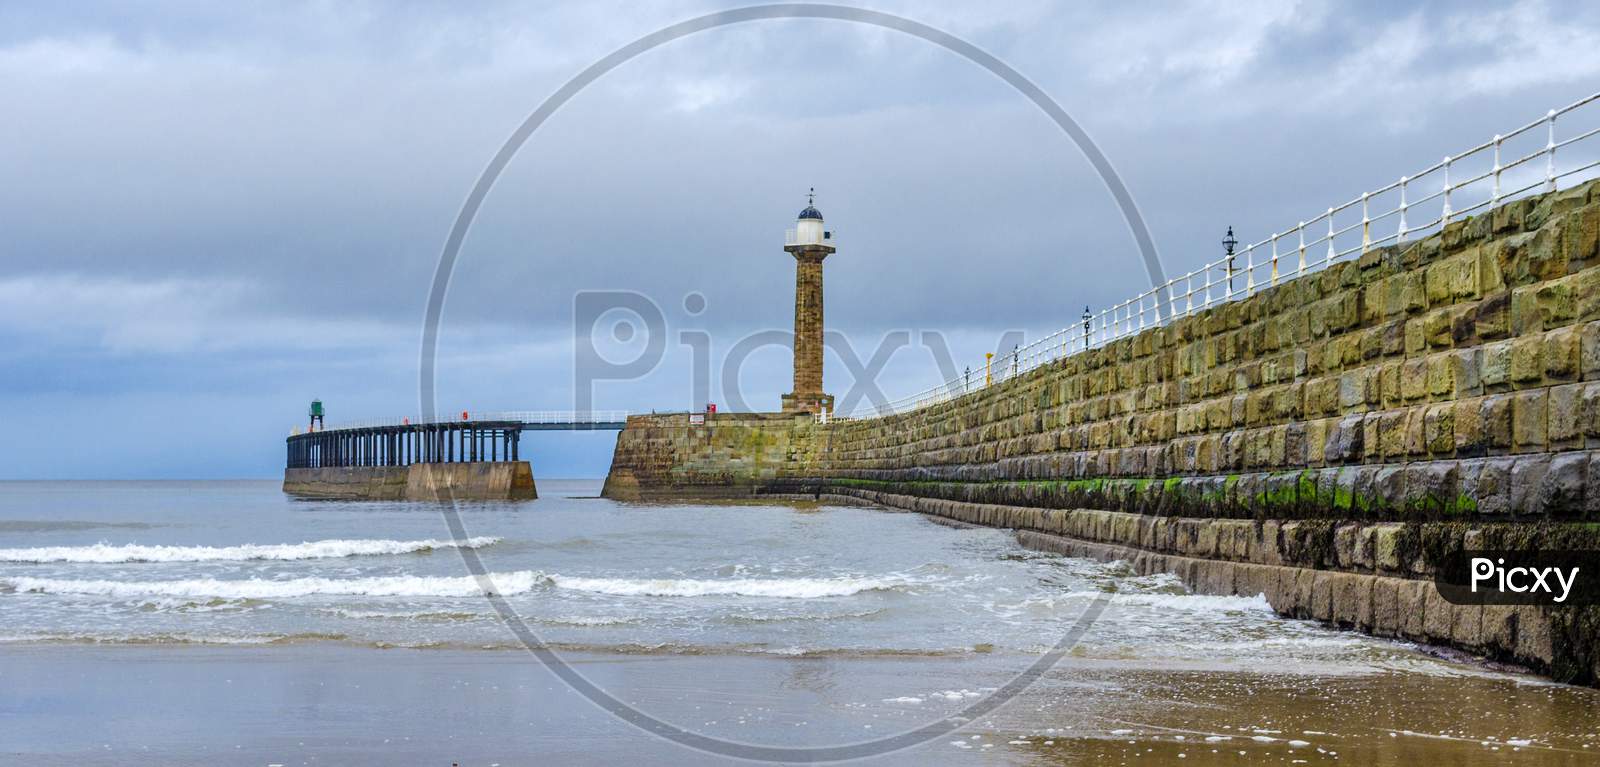 Whitby lighthouse situated on the pier at the harbour entrance